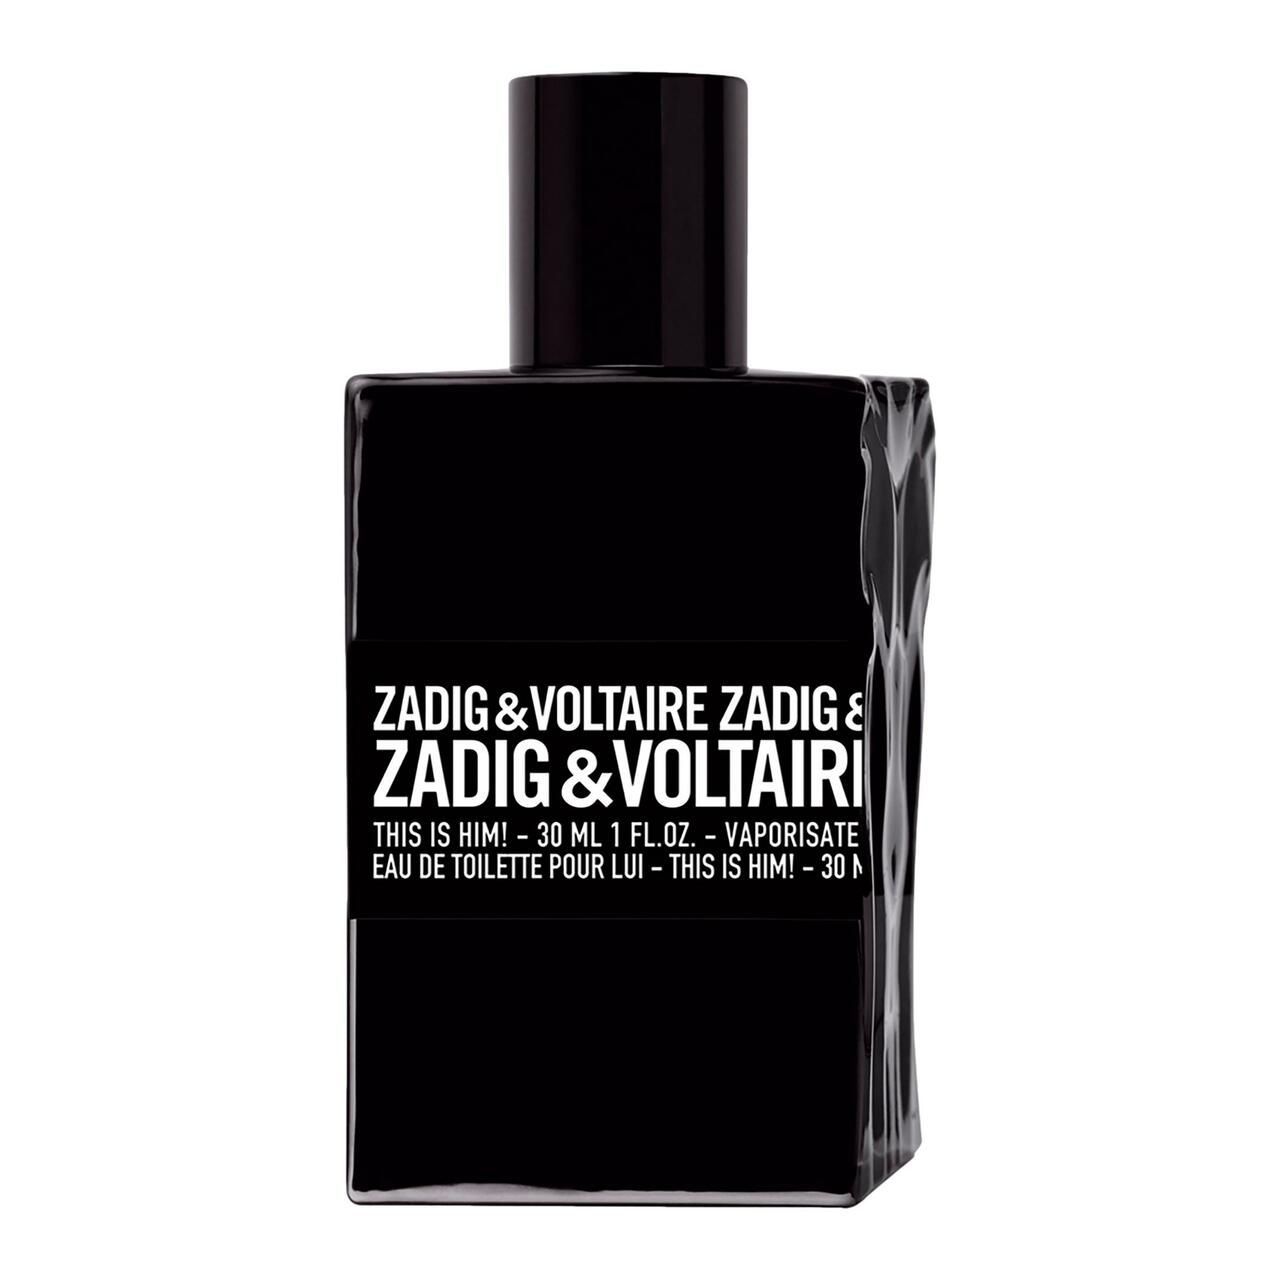 Zadig & Voltaire, This is Him! E.d.T. Nat. Spray